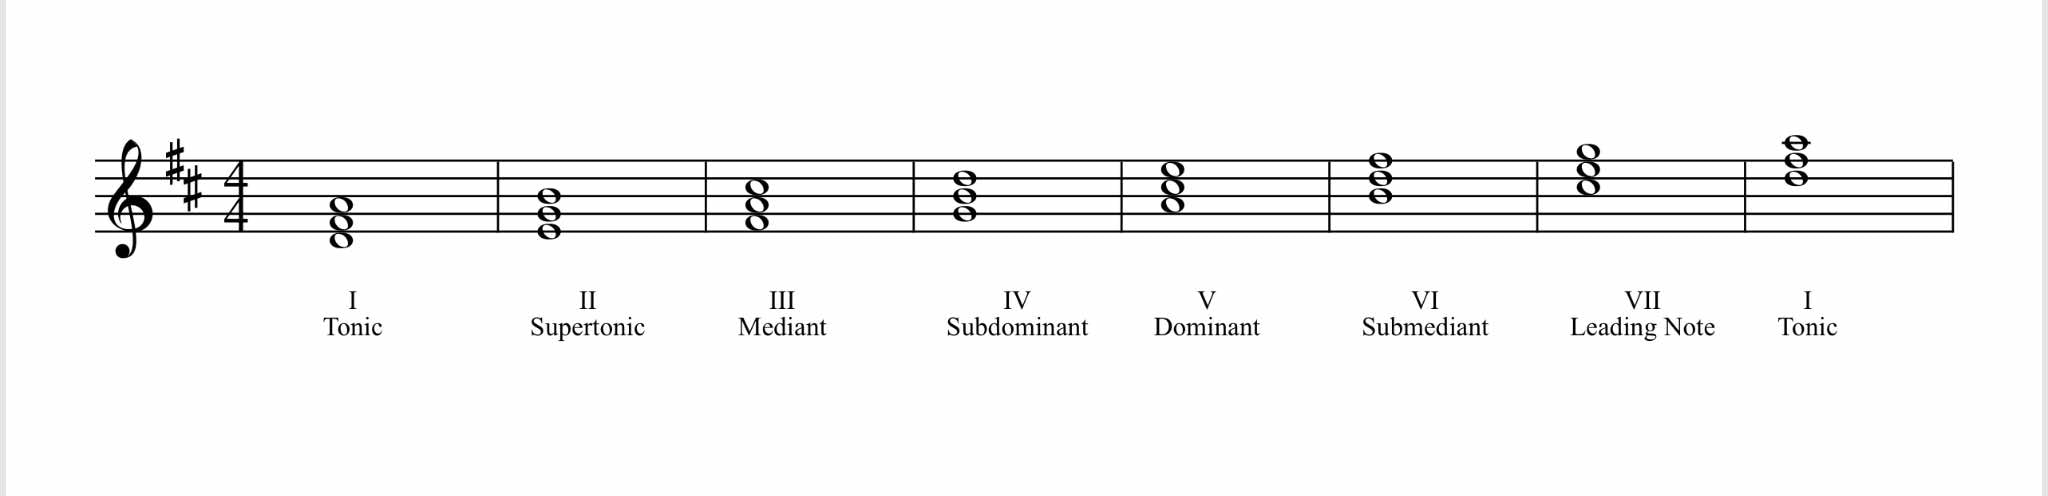 Chords and Roman numerals in the key of D major